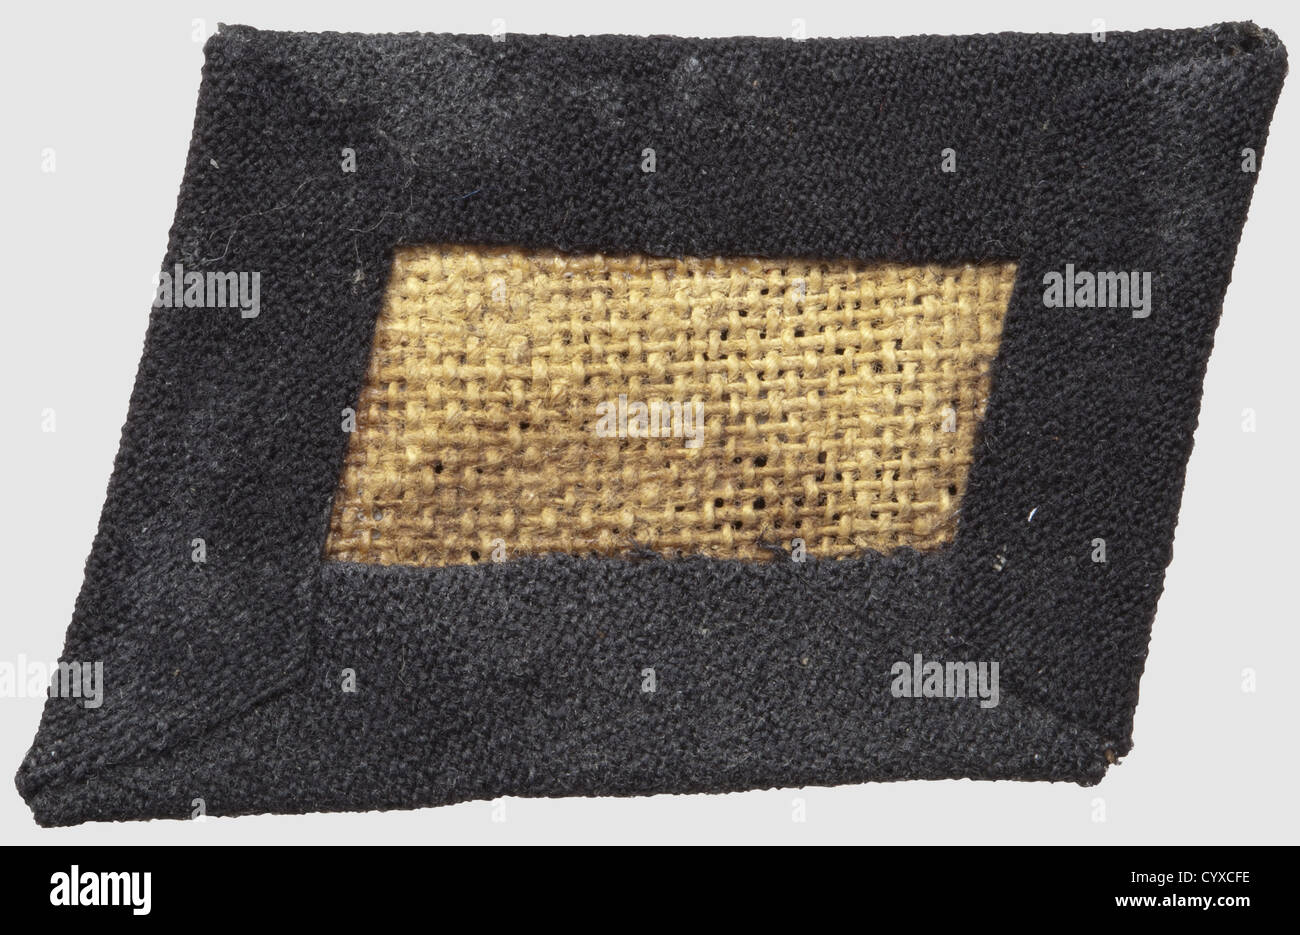 Collar patch for the 'Schalburg-Korps',belonging to the 5th SS-division 'Wiking',of black cotton on a glued linen inlay,RZM-machine- embroidered sunwheel motive. Rare,historic,historical,1930s,20th century,secret service,security service,secret services,security services,police,armed service,armed services,NS,National Socialism,Nazism,Third Reich,German Reich,Germany,utensil,piece of equipment,utensils,object,objects,stills,clipping,clippings,cut out,cut-out,cut-outs,fascism,fascistic,National Socialist,Nazi,Nazi period,unif,Additional-Rights-Clearences-Not Available Stock Photo